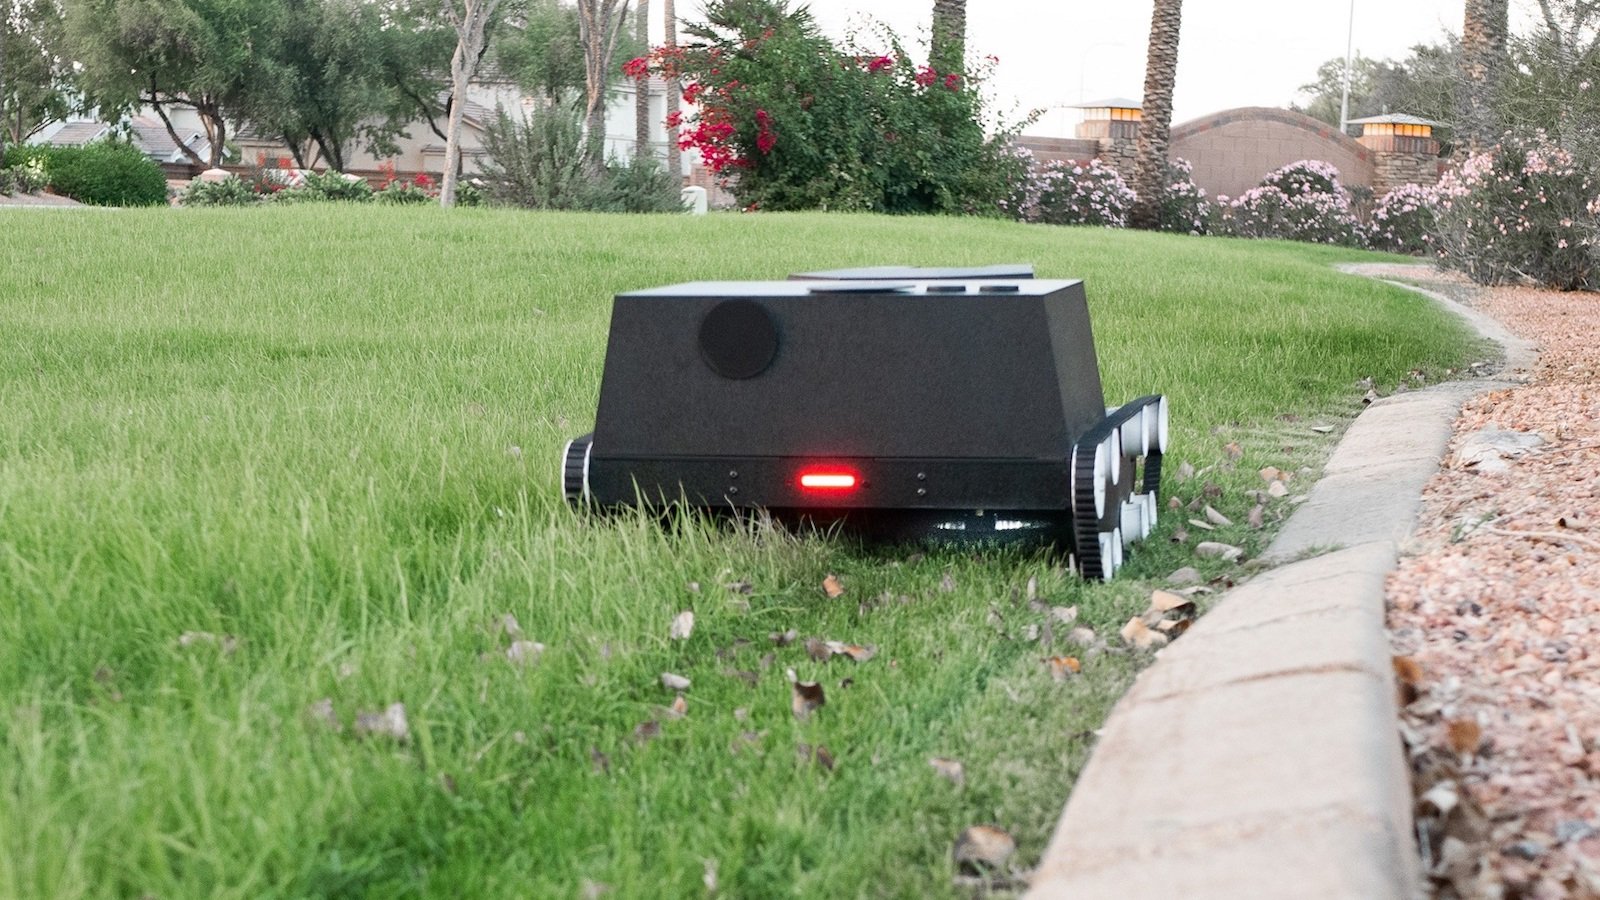 Yardroid intelligent landscaping robot mows grass, waters plants, kills weeds, and more